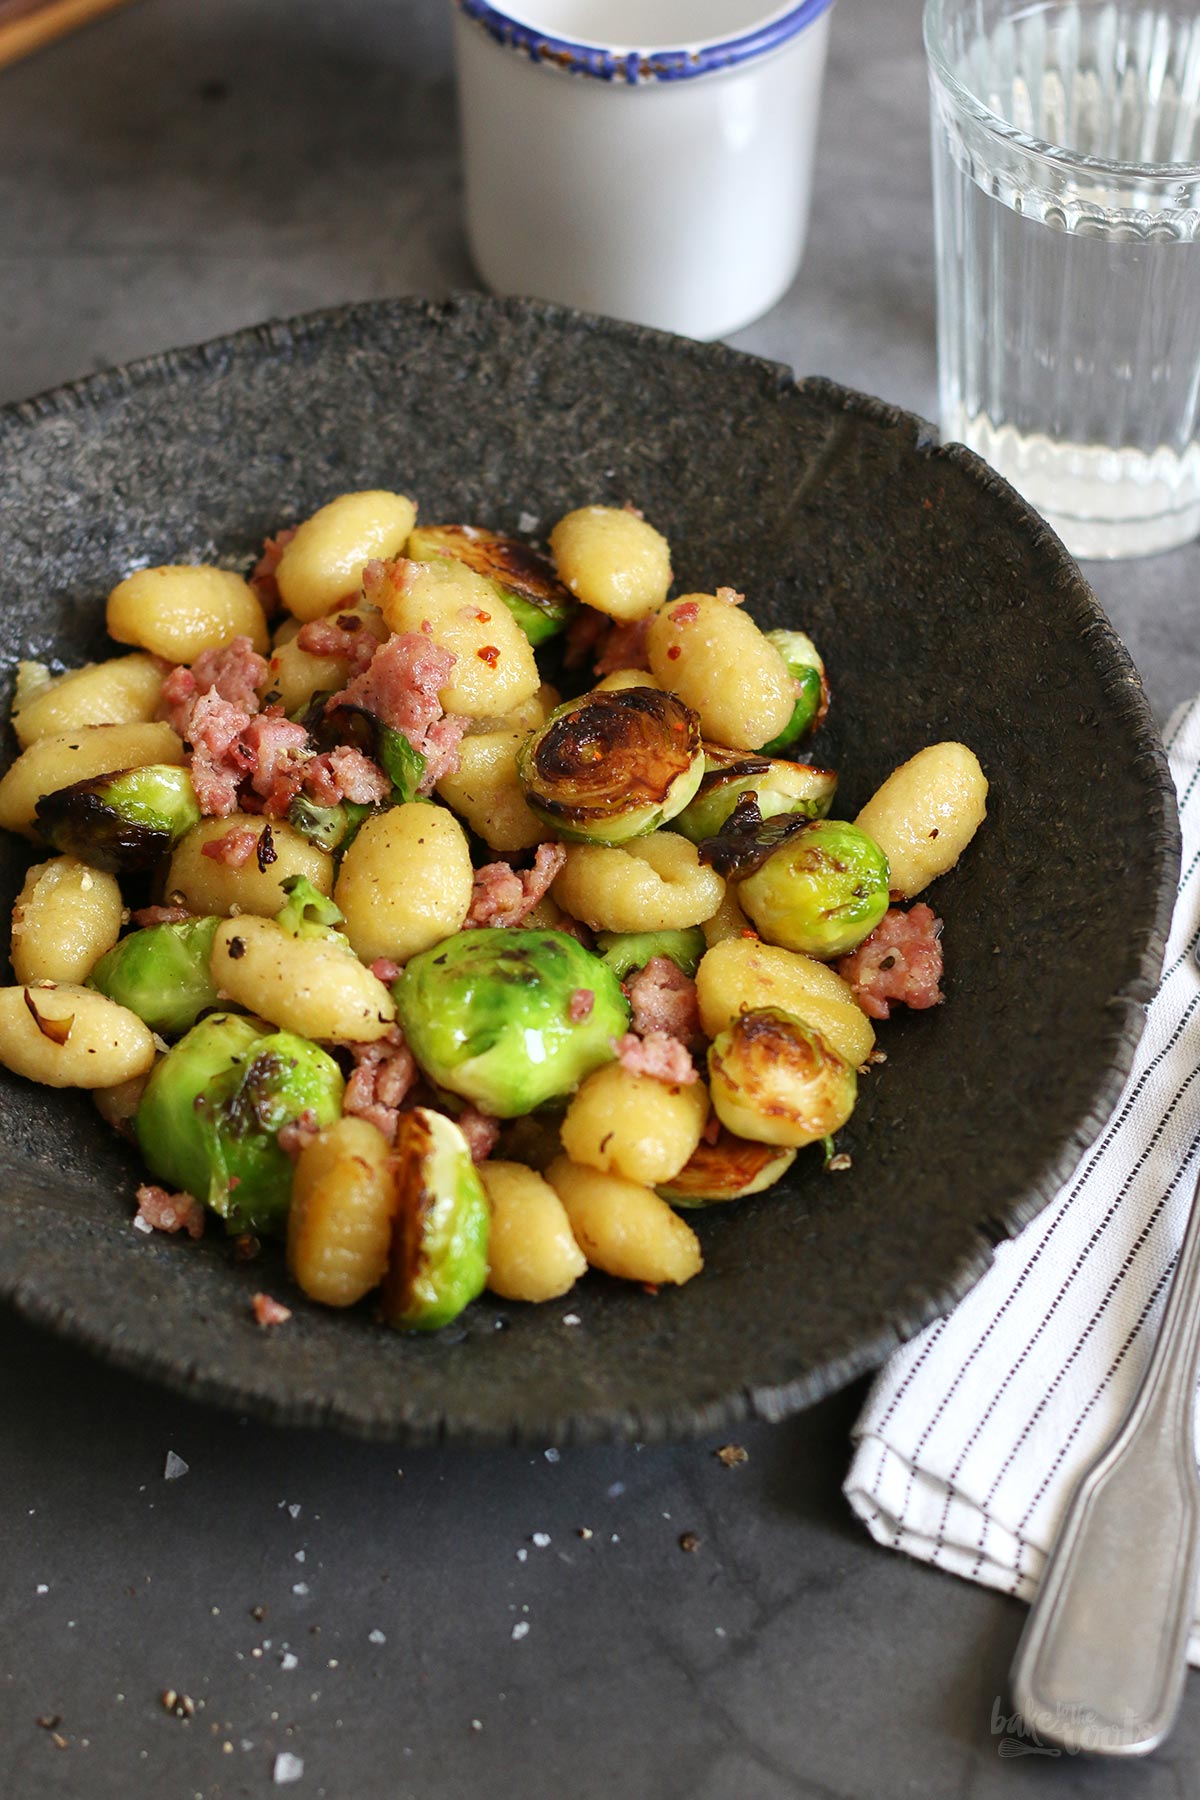 Gnocchi with Brussels Sprouts and Salsiccia | Bake to the roots